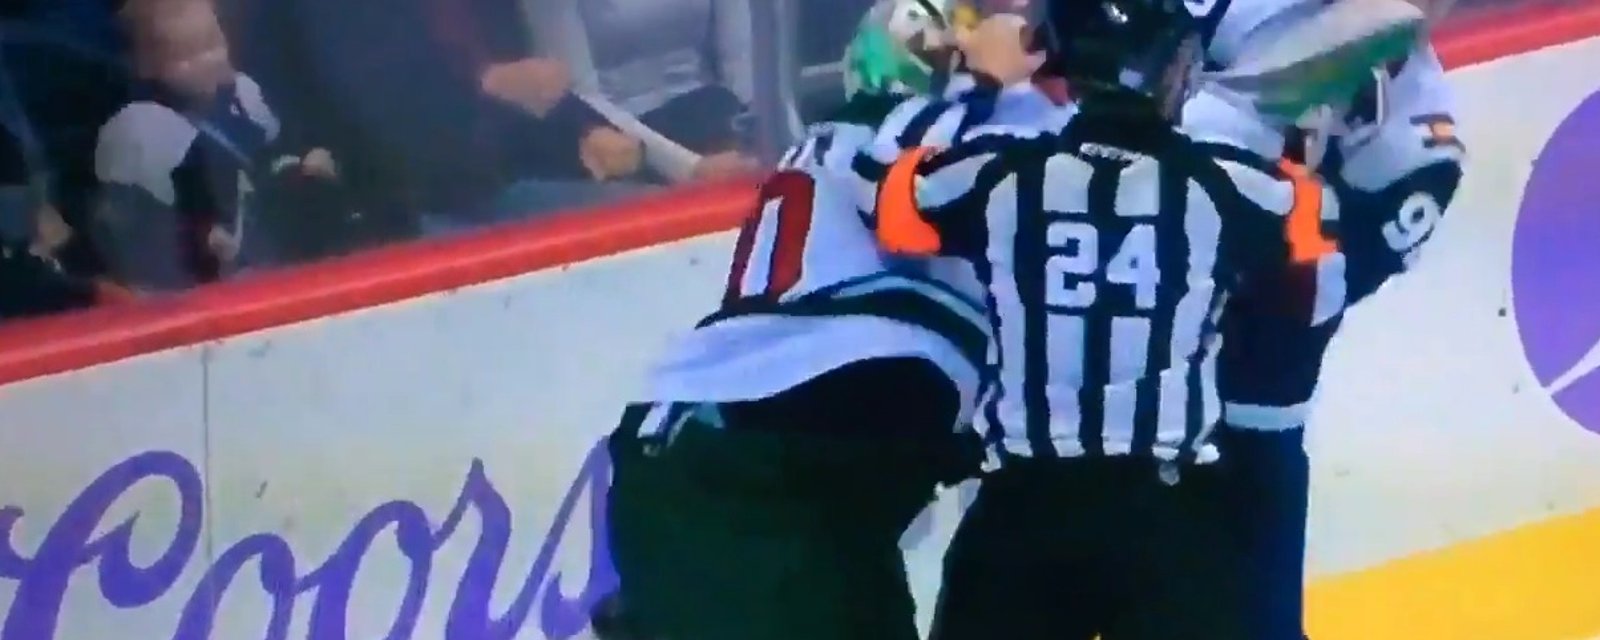 Goalie and player throw punches after clash in the crease.